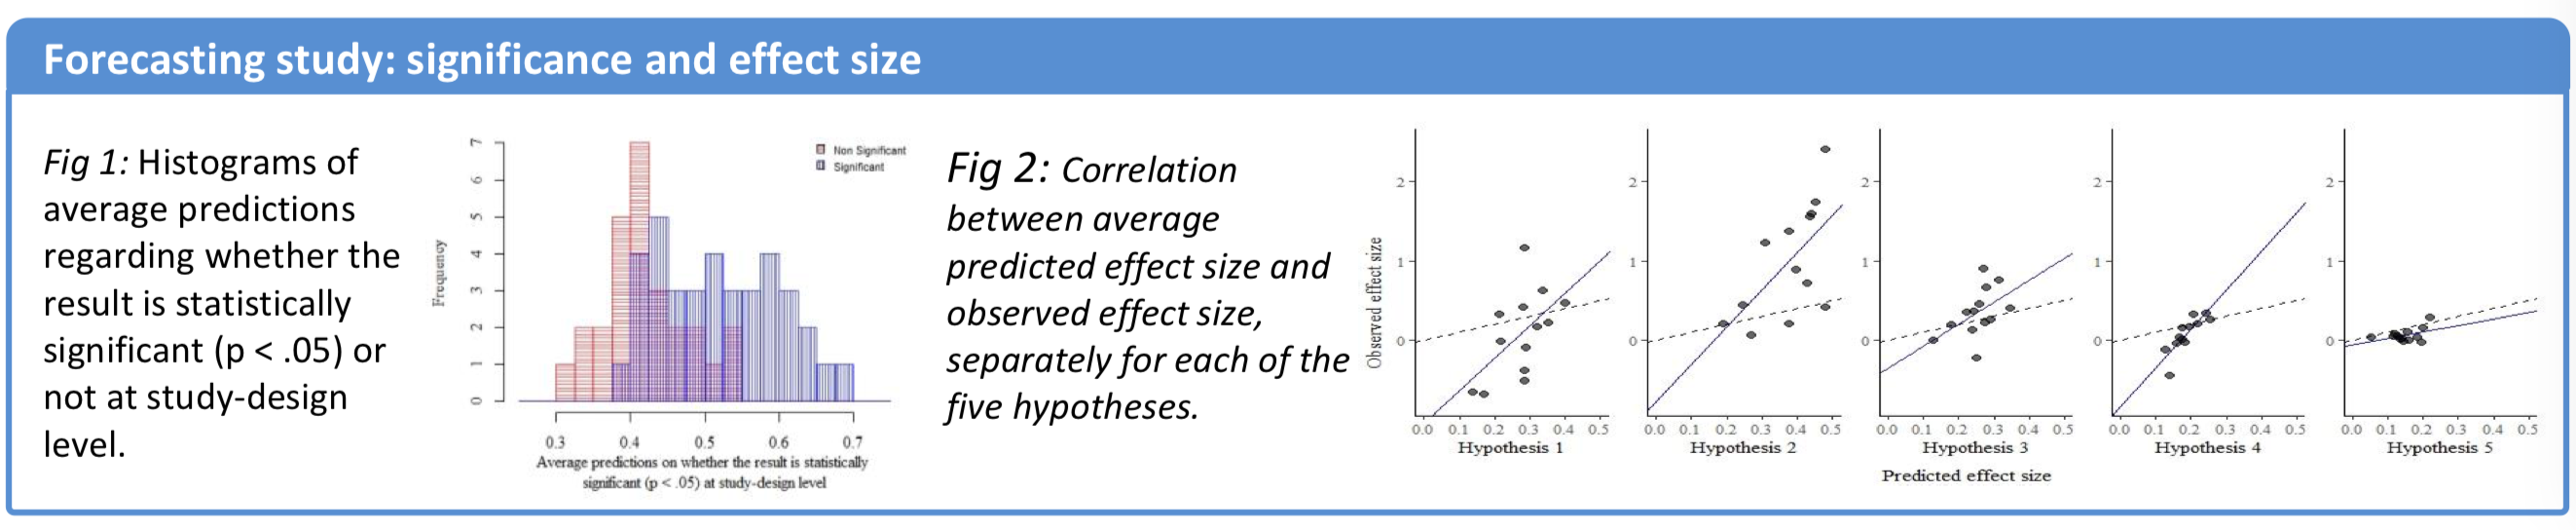 Section of Domenico's poster, showing correlations between forecasts and results, for each hypothesis.